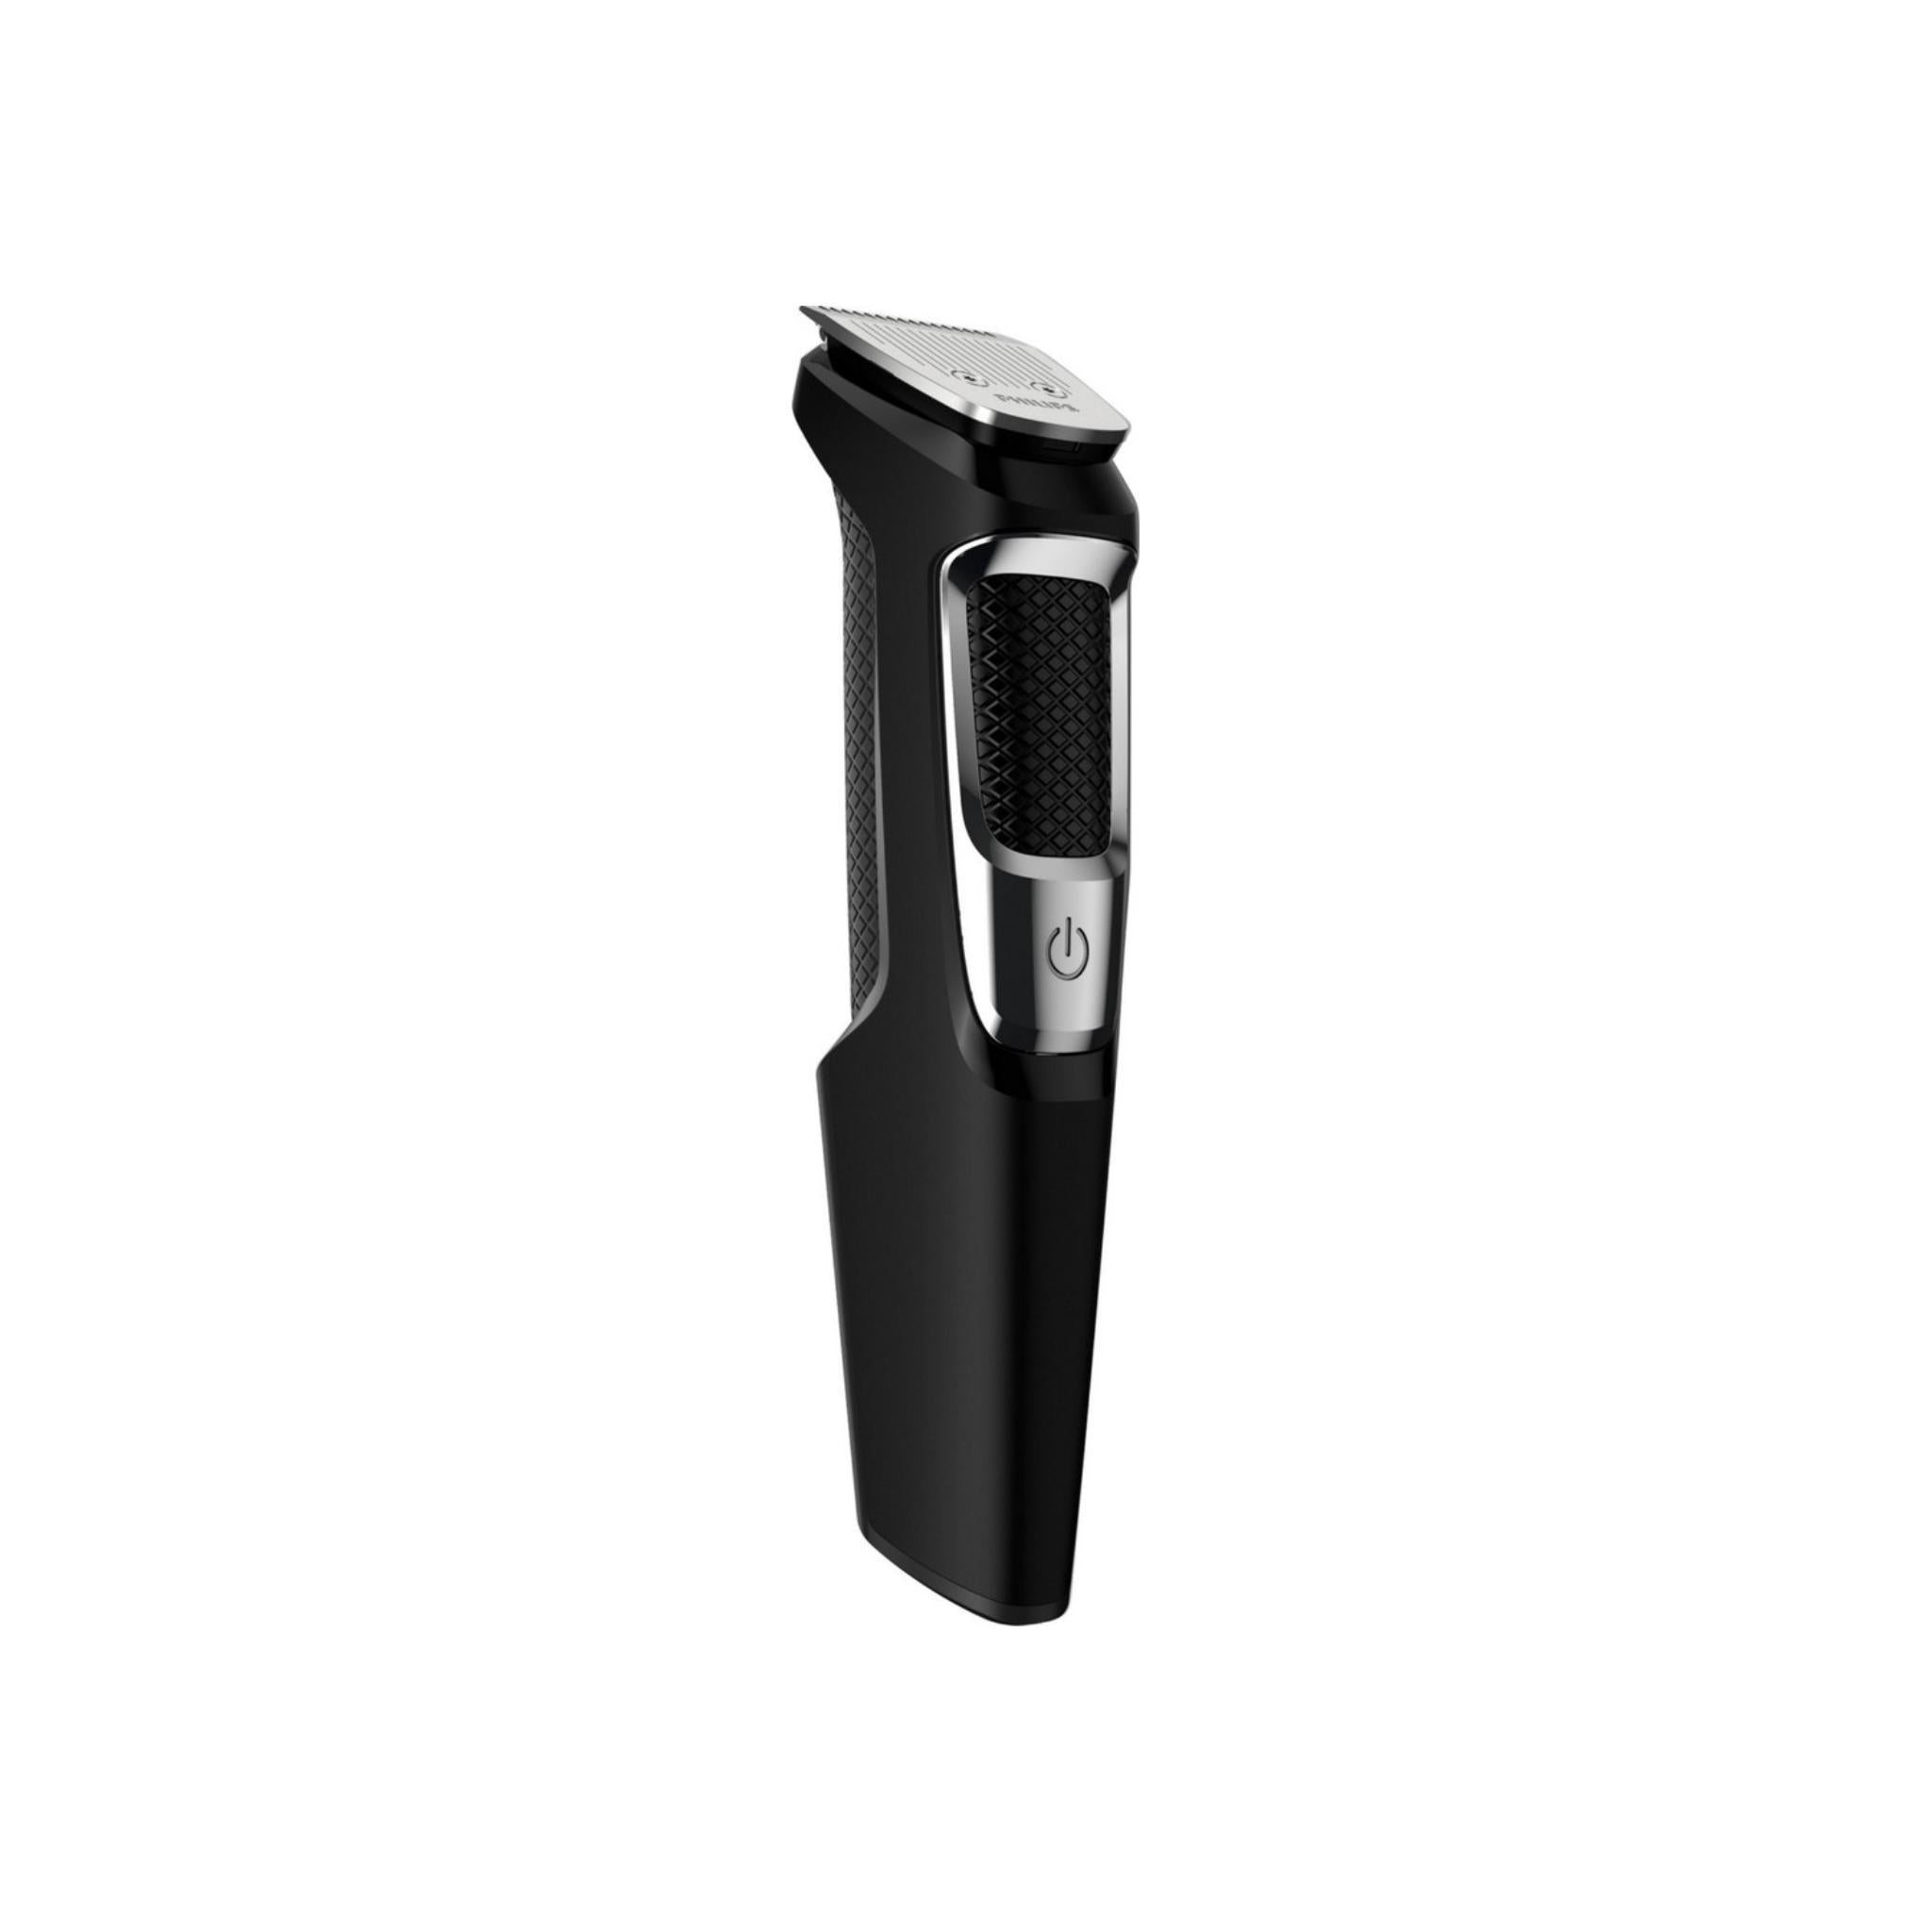 philips all in one trimmer 3000